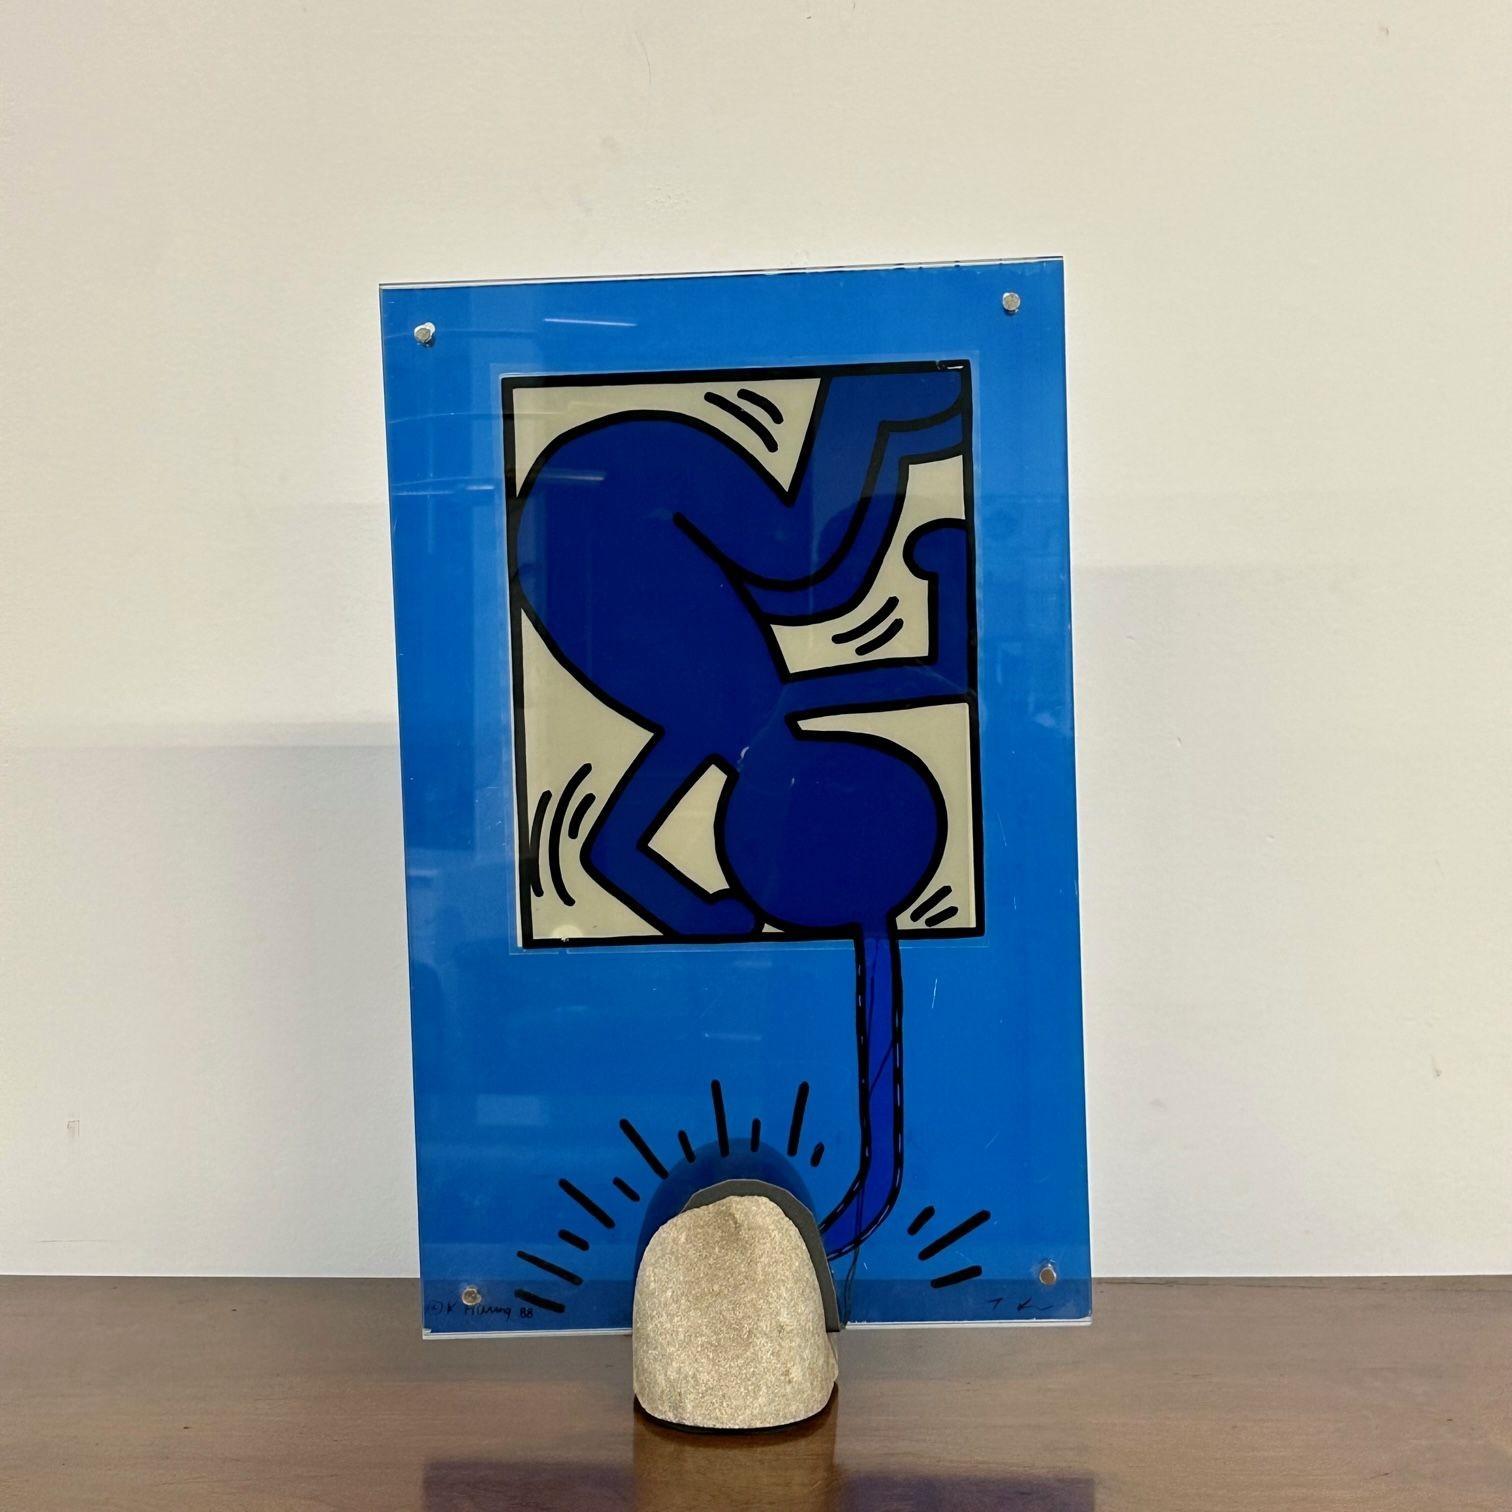 Mid-Century Modern Keith haring sculpture / lamp, glass and stone, Signed, 1988.
 
Limited edition Keith Haring and Toshiyuki Kita lamp. Comprised of reverse screen printed glass and stone. Signed and dated on the lower left hand corner. 
